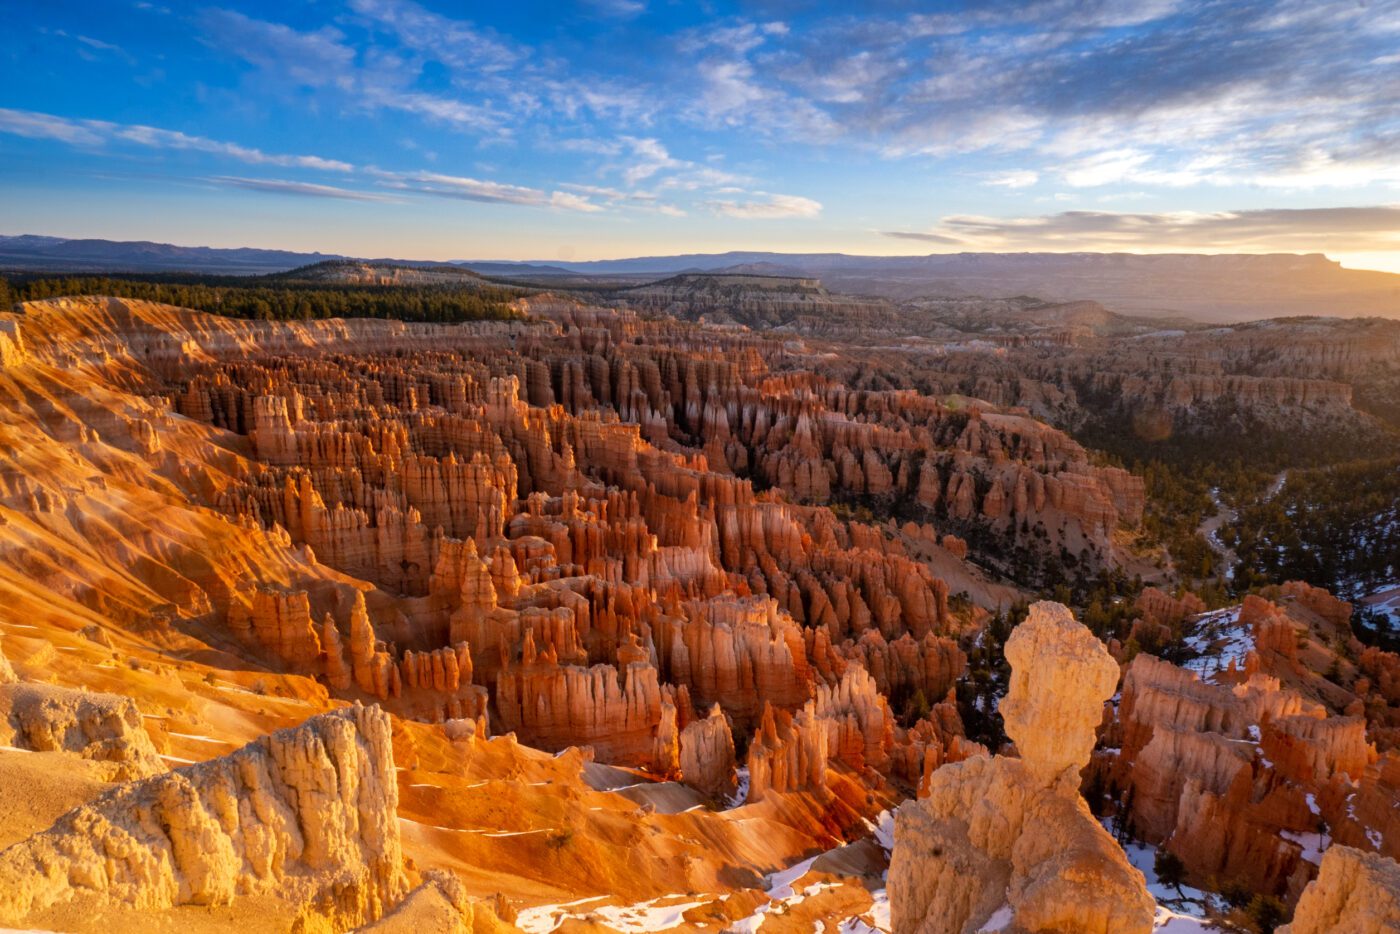 Aerial view of the landscape in Bryce Canyon.